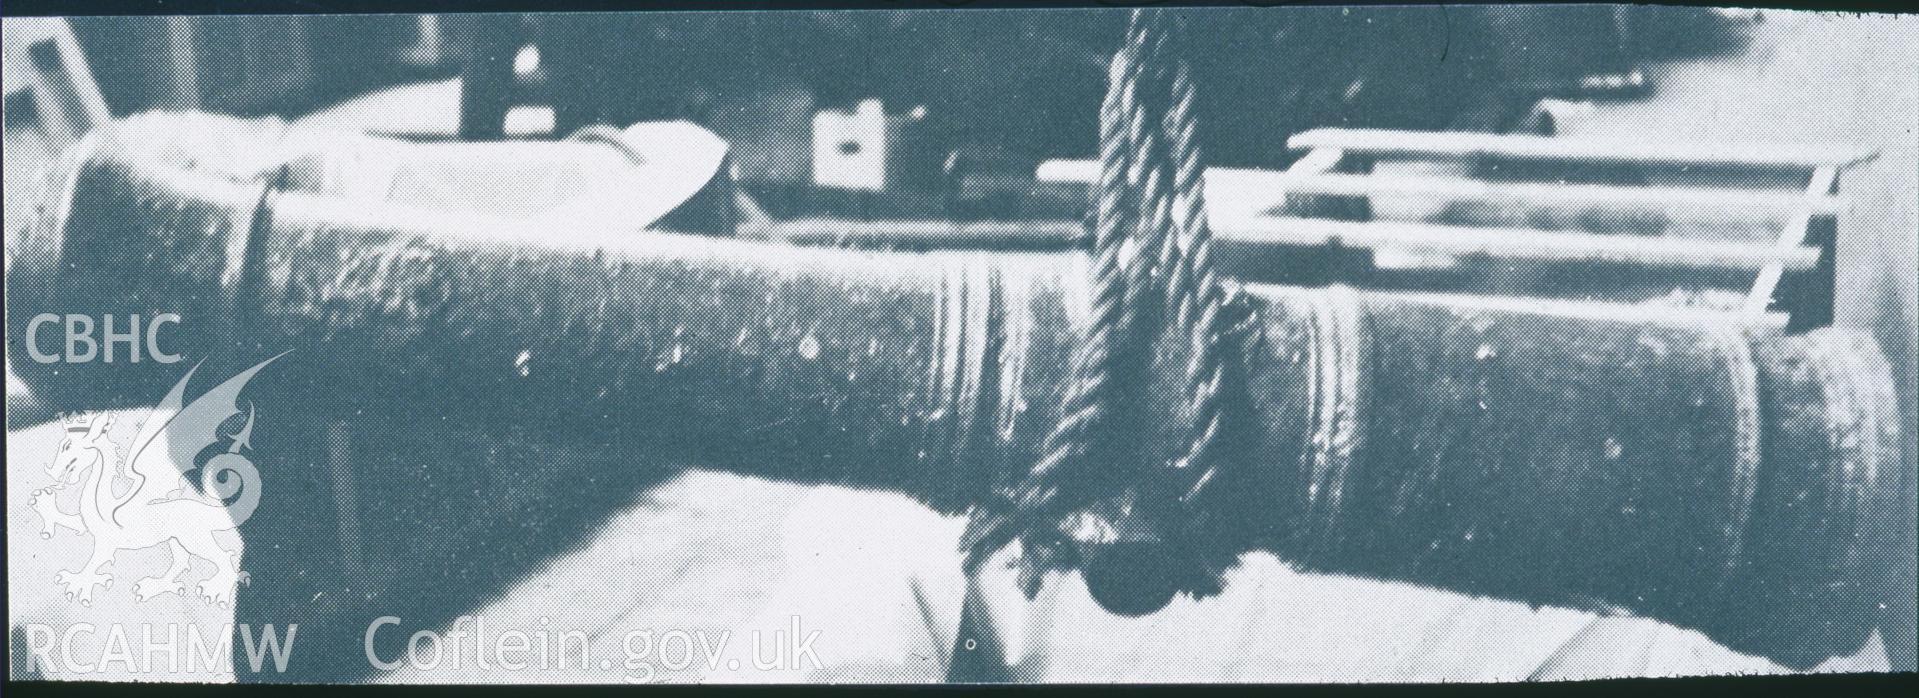 Colour slide of a gun being raised, from a survey of the Mary designated shipwreck, courtesy of National Museums, Liverpool (Merseyside Maritime Museum)